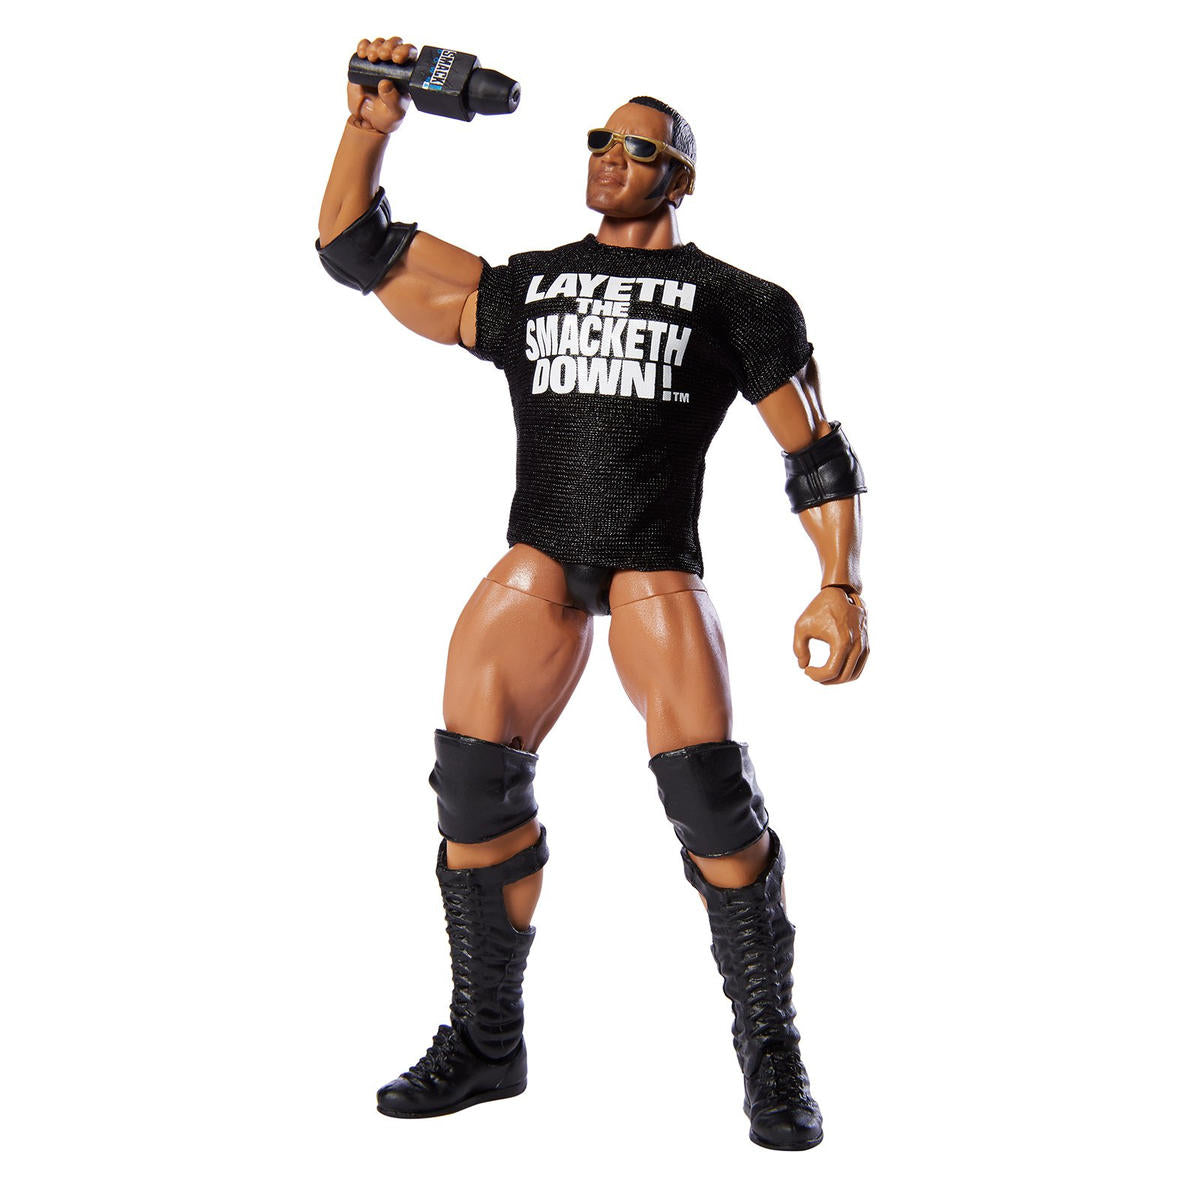 2019 WWE Mattel Elite Collection Series 69 The Rock [Exclusive]